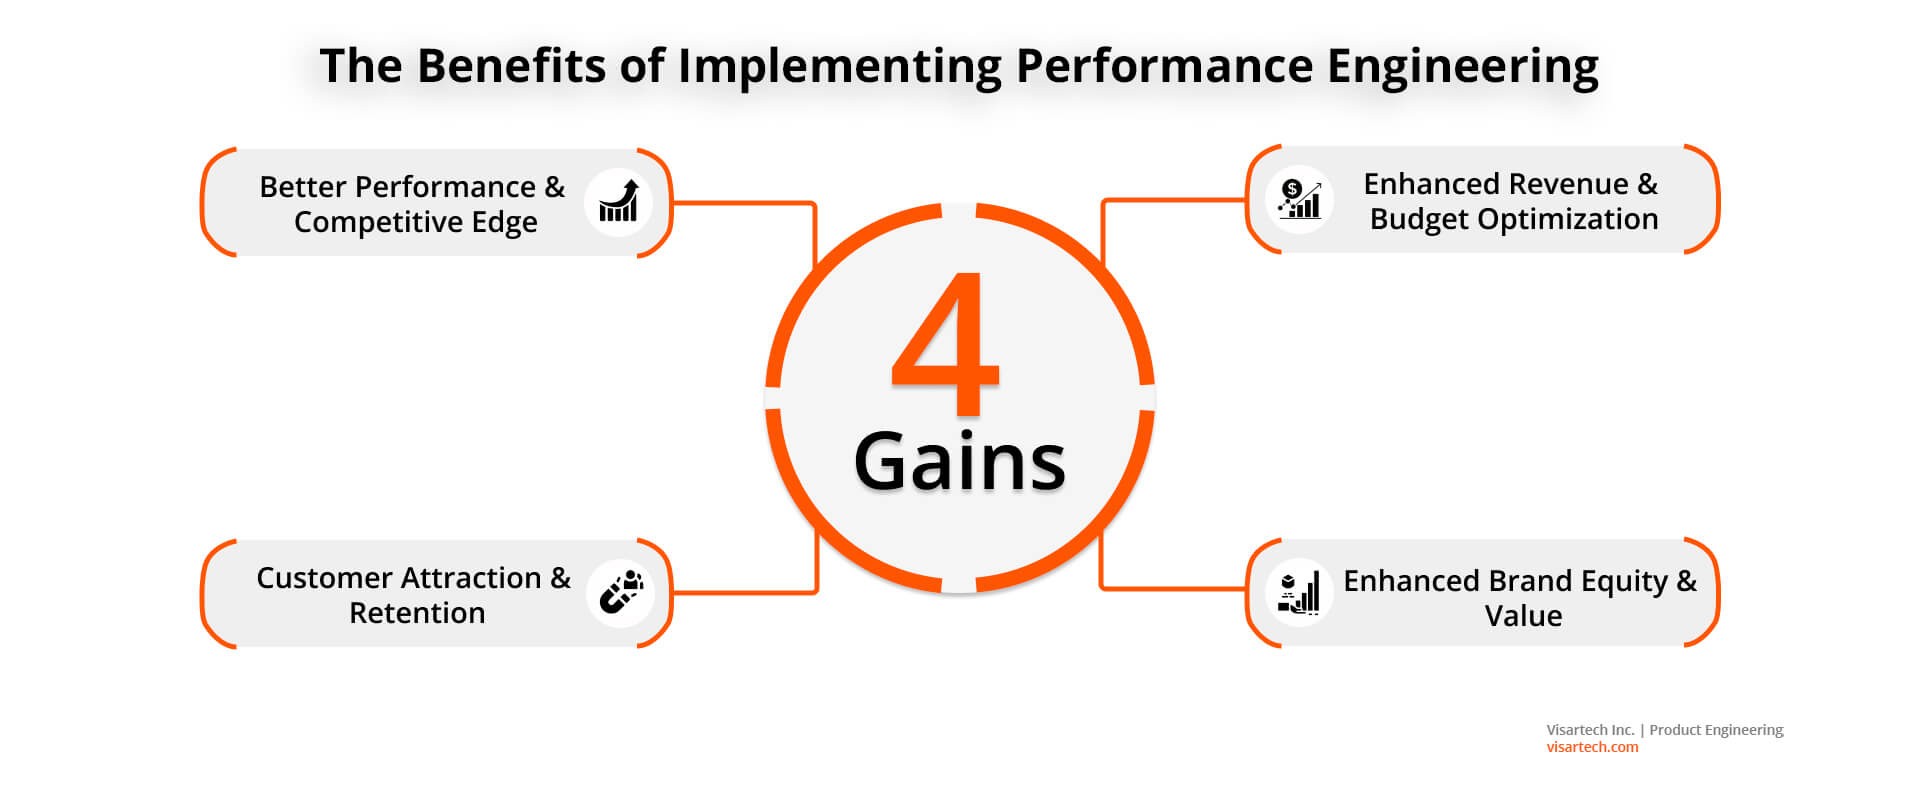 The Benefits of Implementing Performance Engineering - Visartech Blog